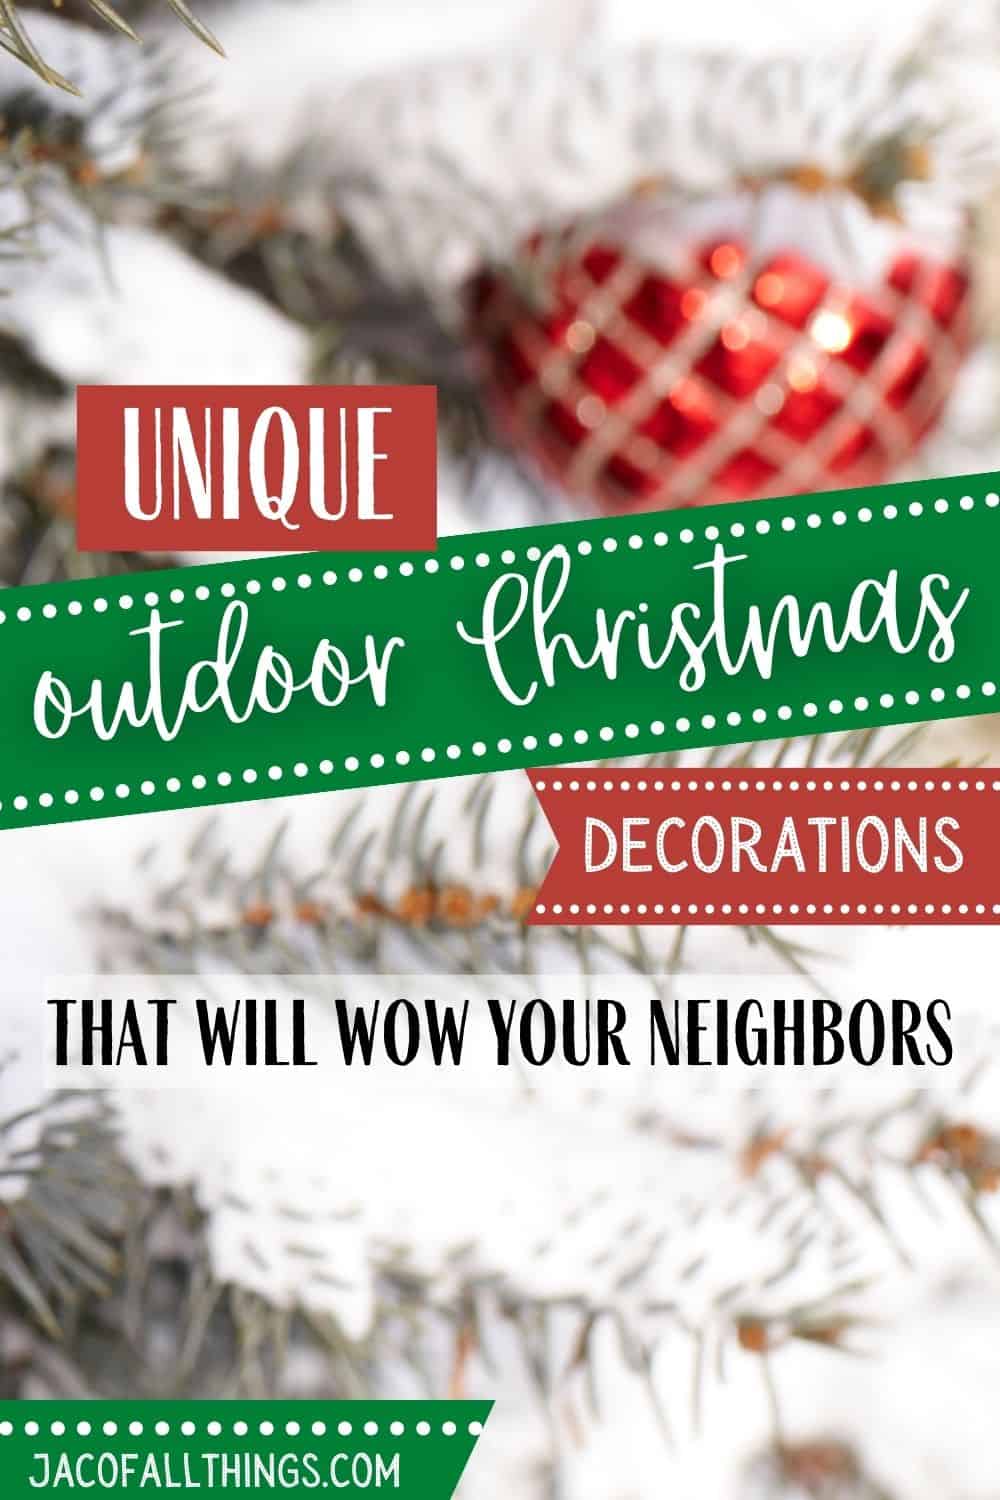 If you're looking for a unique outdoor Christmas decoration that will be the envy of your neighborhood, we hope this list provides just what you need! With these holiday decorations, there's no such thing as too much Christmas cheer around this time of year! Be merry and unique! |christmas decor | outside Christmas decorations|